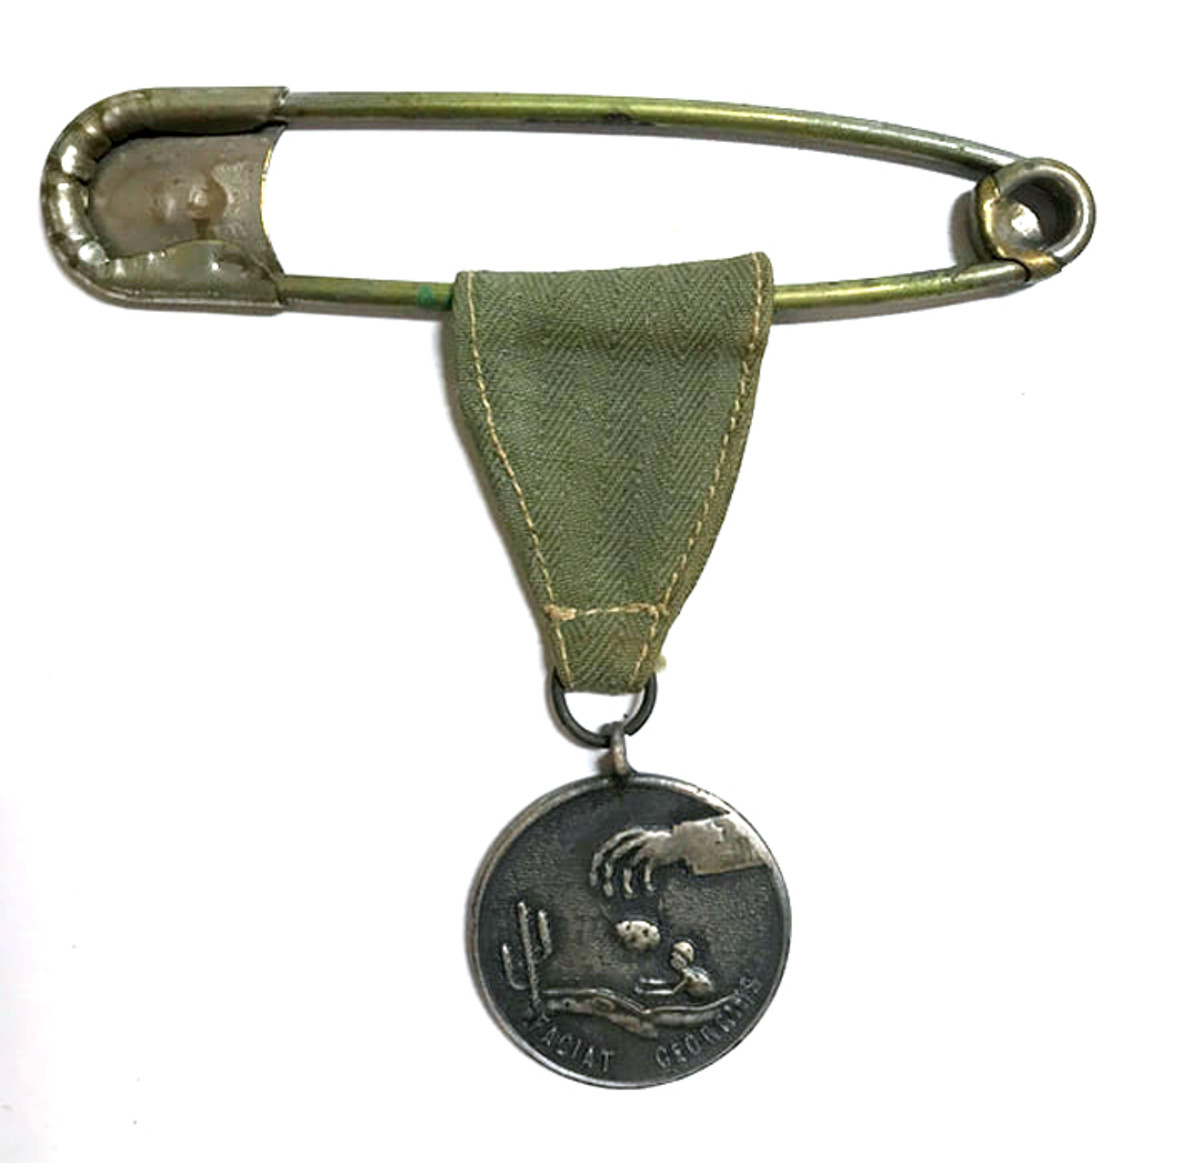 Faciat Georgius Medal from the collection of the National Museum of the Marine Corps